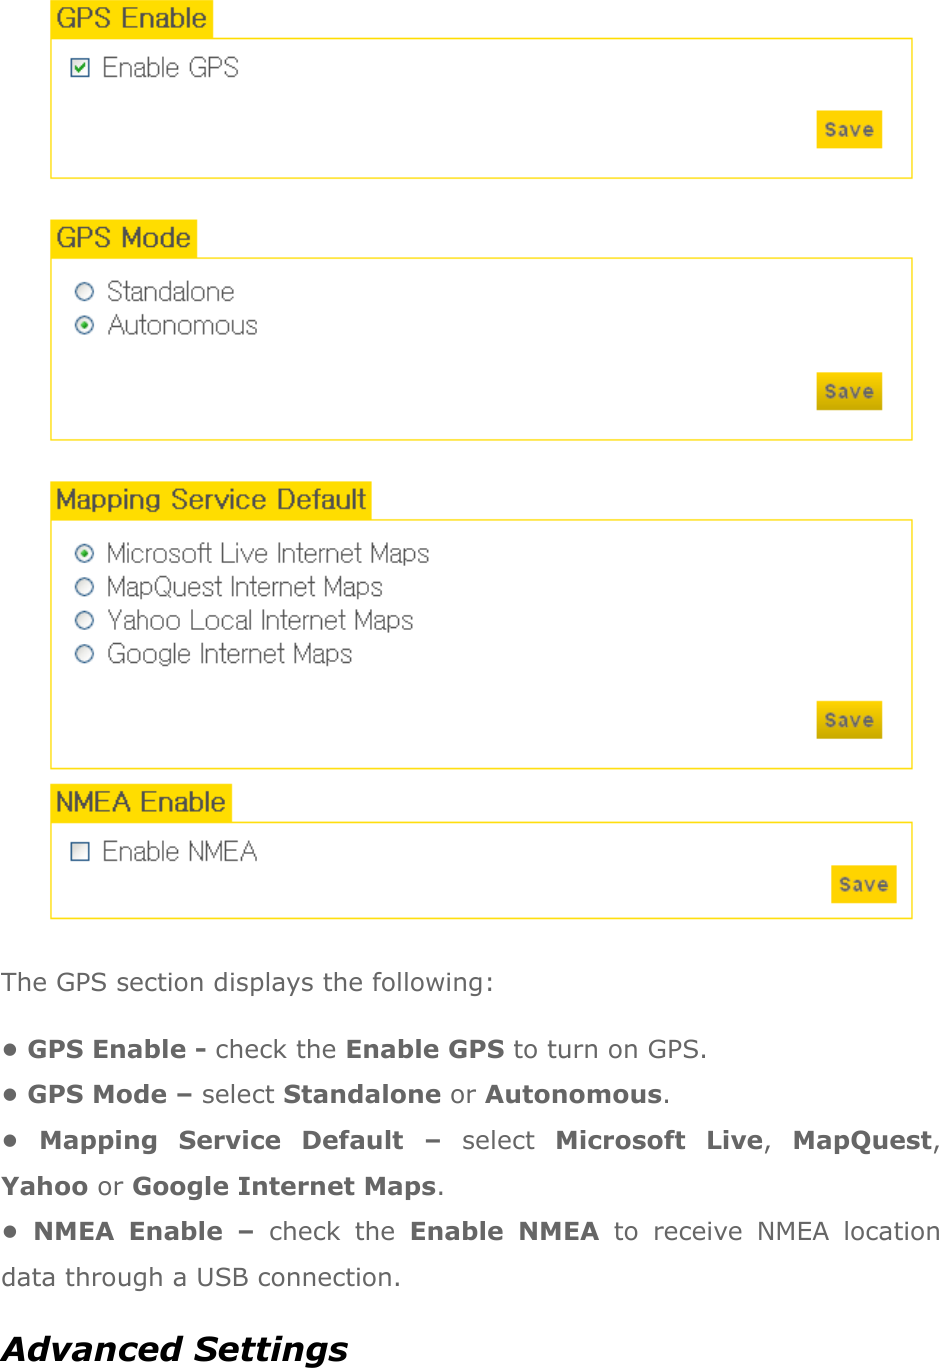  The GPS section displays the following: • GPS Enable - check the Enable GPS to turn on GPS. • GPS Mode – select Standalone or Autonomous. •  Mapping  Service  Default  – select  Microsoft  Live,  MapQuest, Yahoo or Google Internet Maps.   •  NMEA  Enable  – check  the  Enable  NMEA  to  receive  NMEA  location data through a USB connection. Advanced Settings 